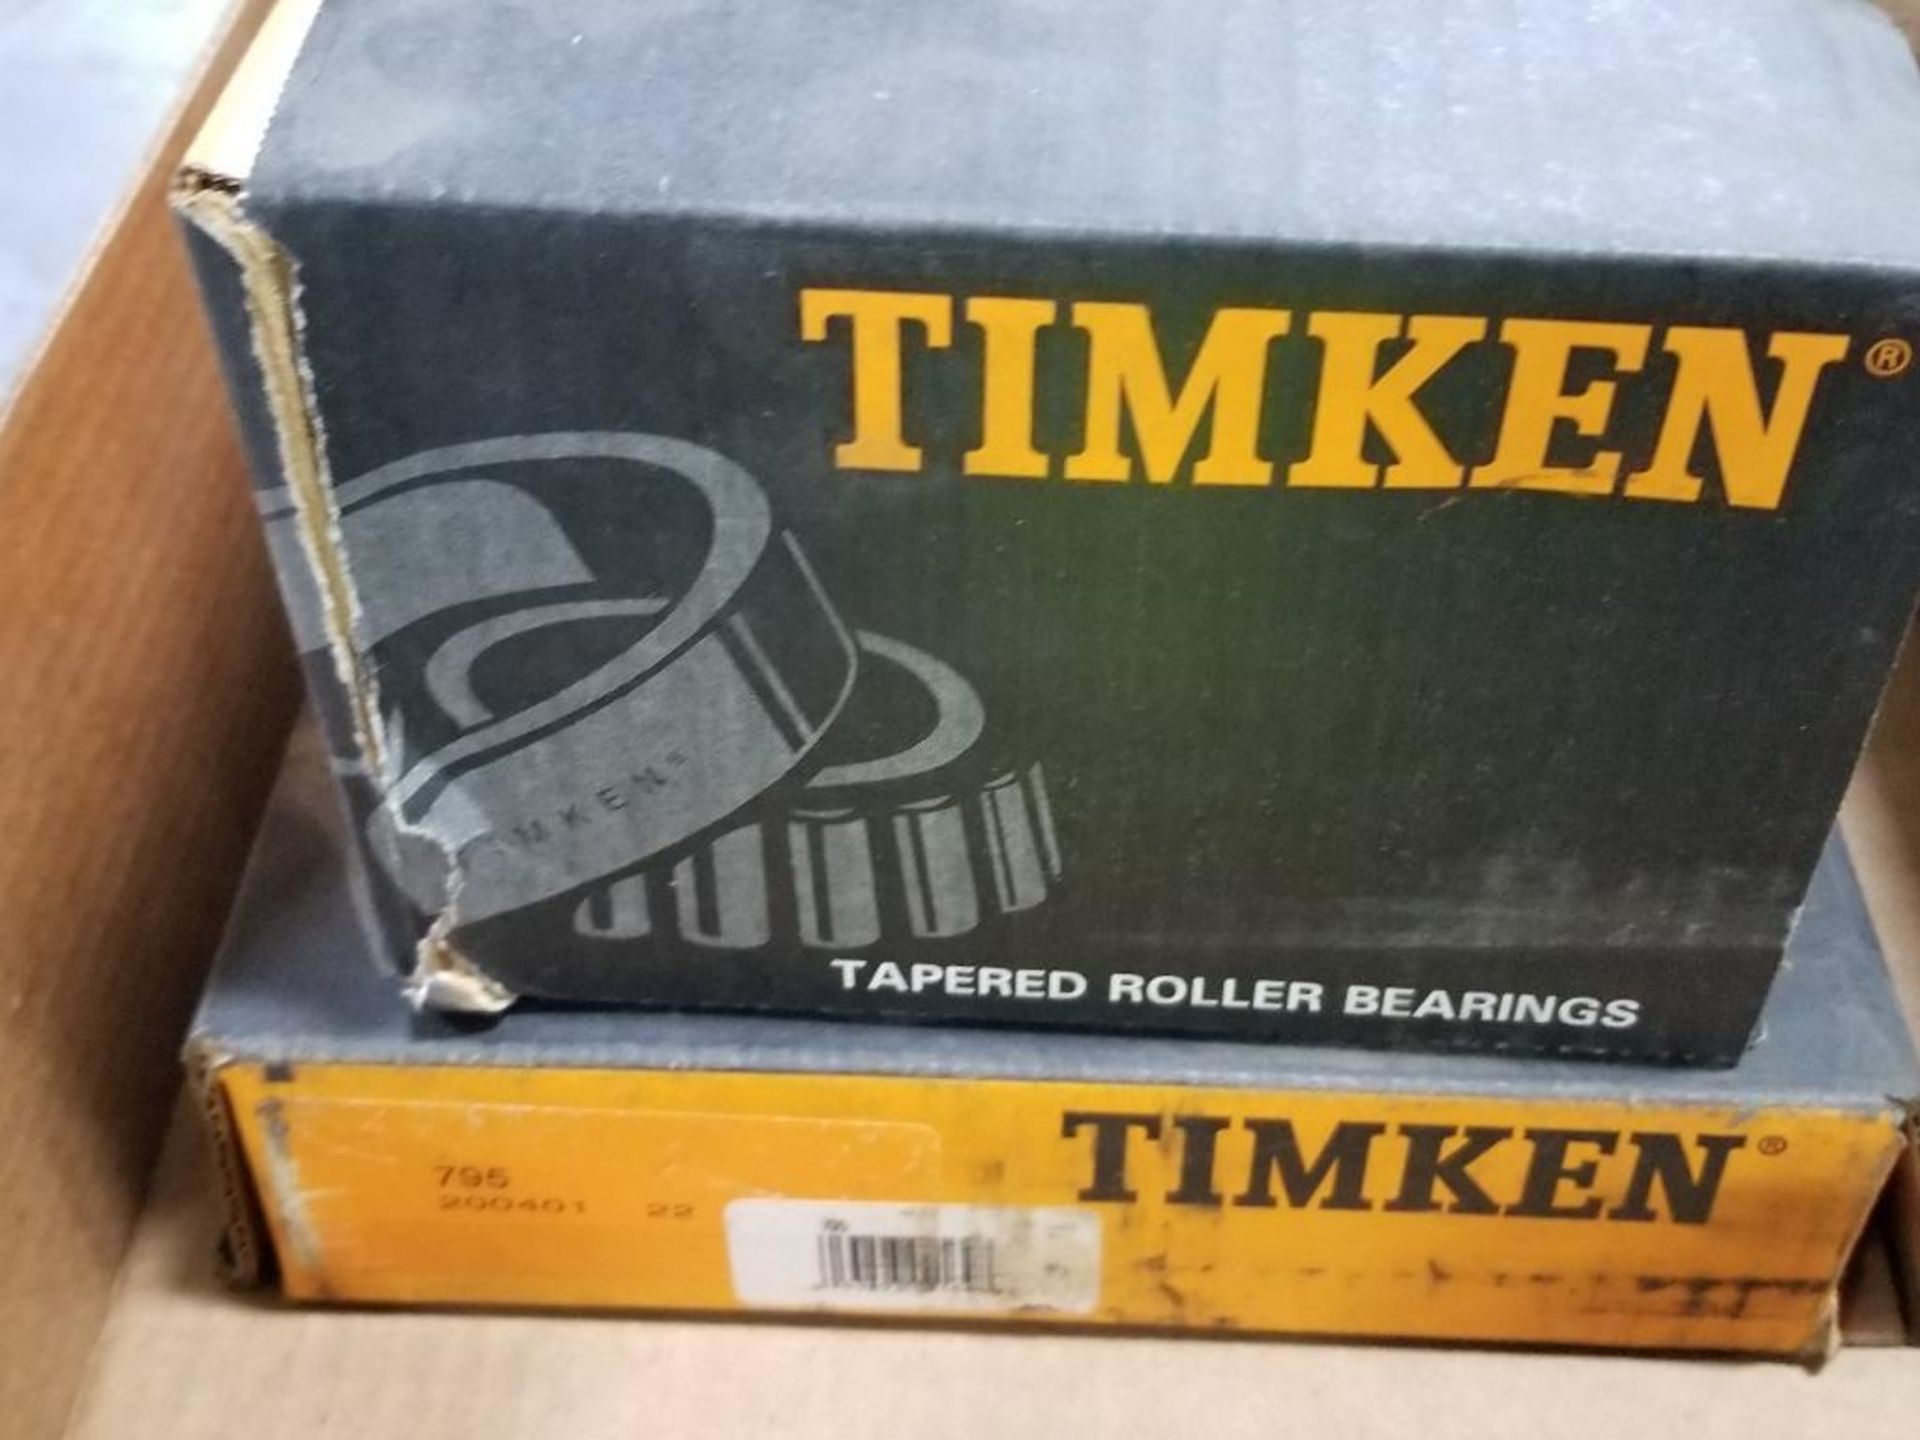 Qty 2 - Timken Bearings. Part number 752D and 795. - Image 5 of 5